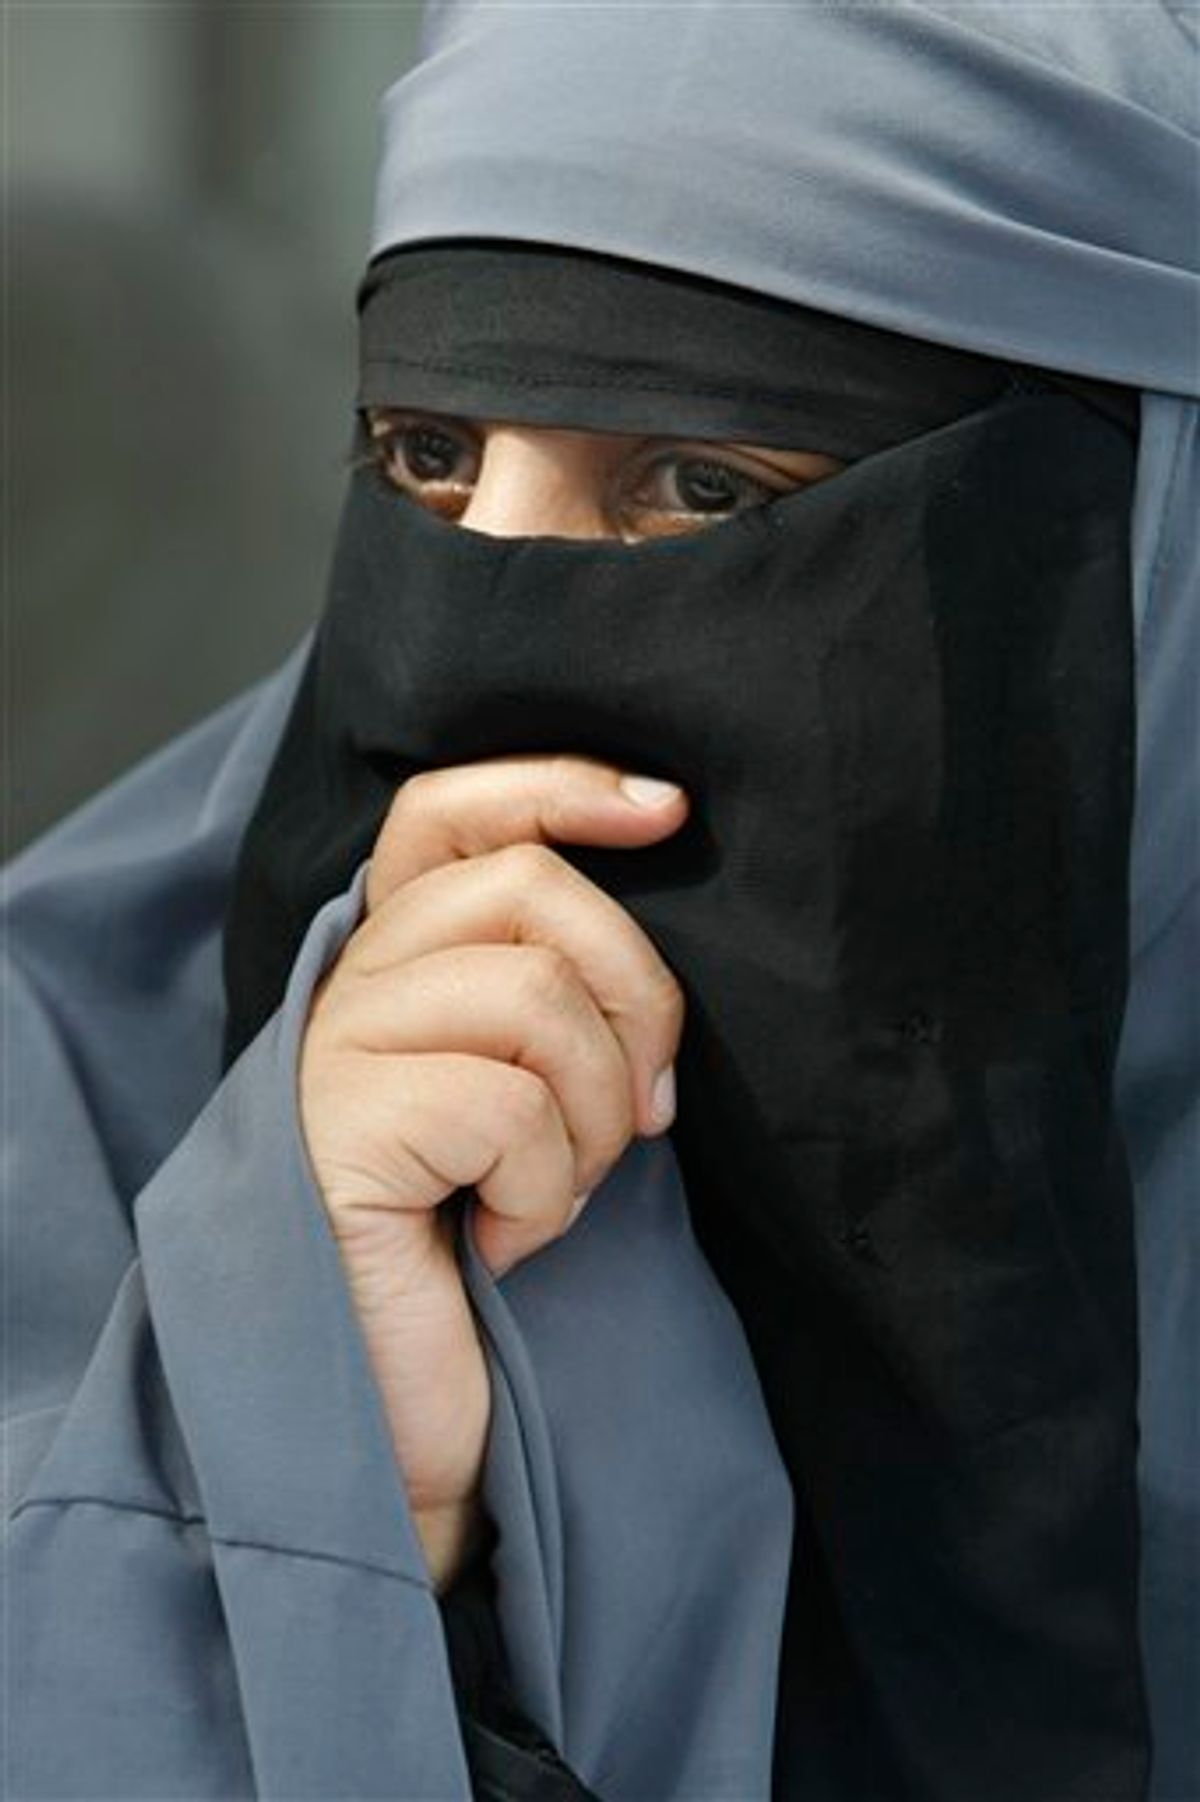 France's Kenza Drider, dressed in a niqab, speaks with reporters during a press conference in Montreuil, east of Paris, Tuesday May 18, 2010. The French government will examine Wednesday,  a proposed bill forbidding burqa-style Islamic veils that cover the face, on the grounds that they do not respect French values or women's dignity.(AP Photo/Remy de la Mauviniere) (AP)